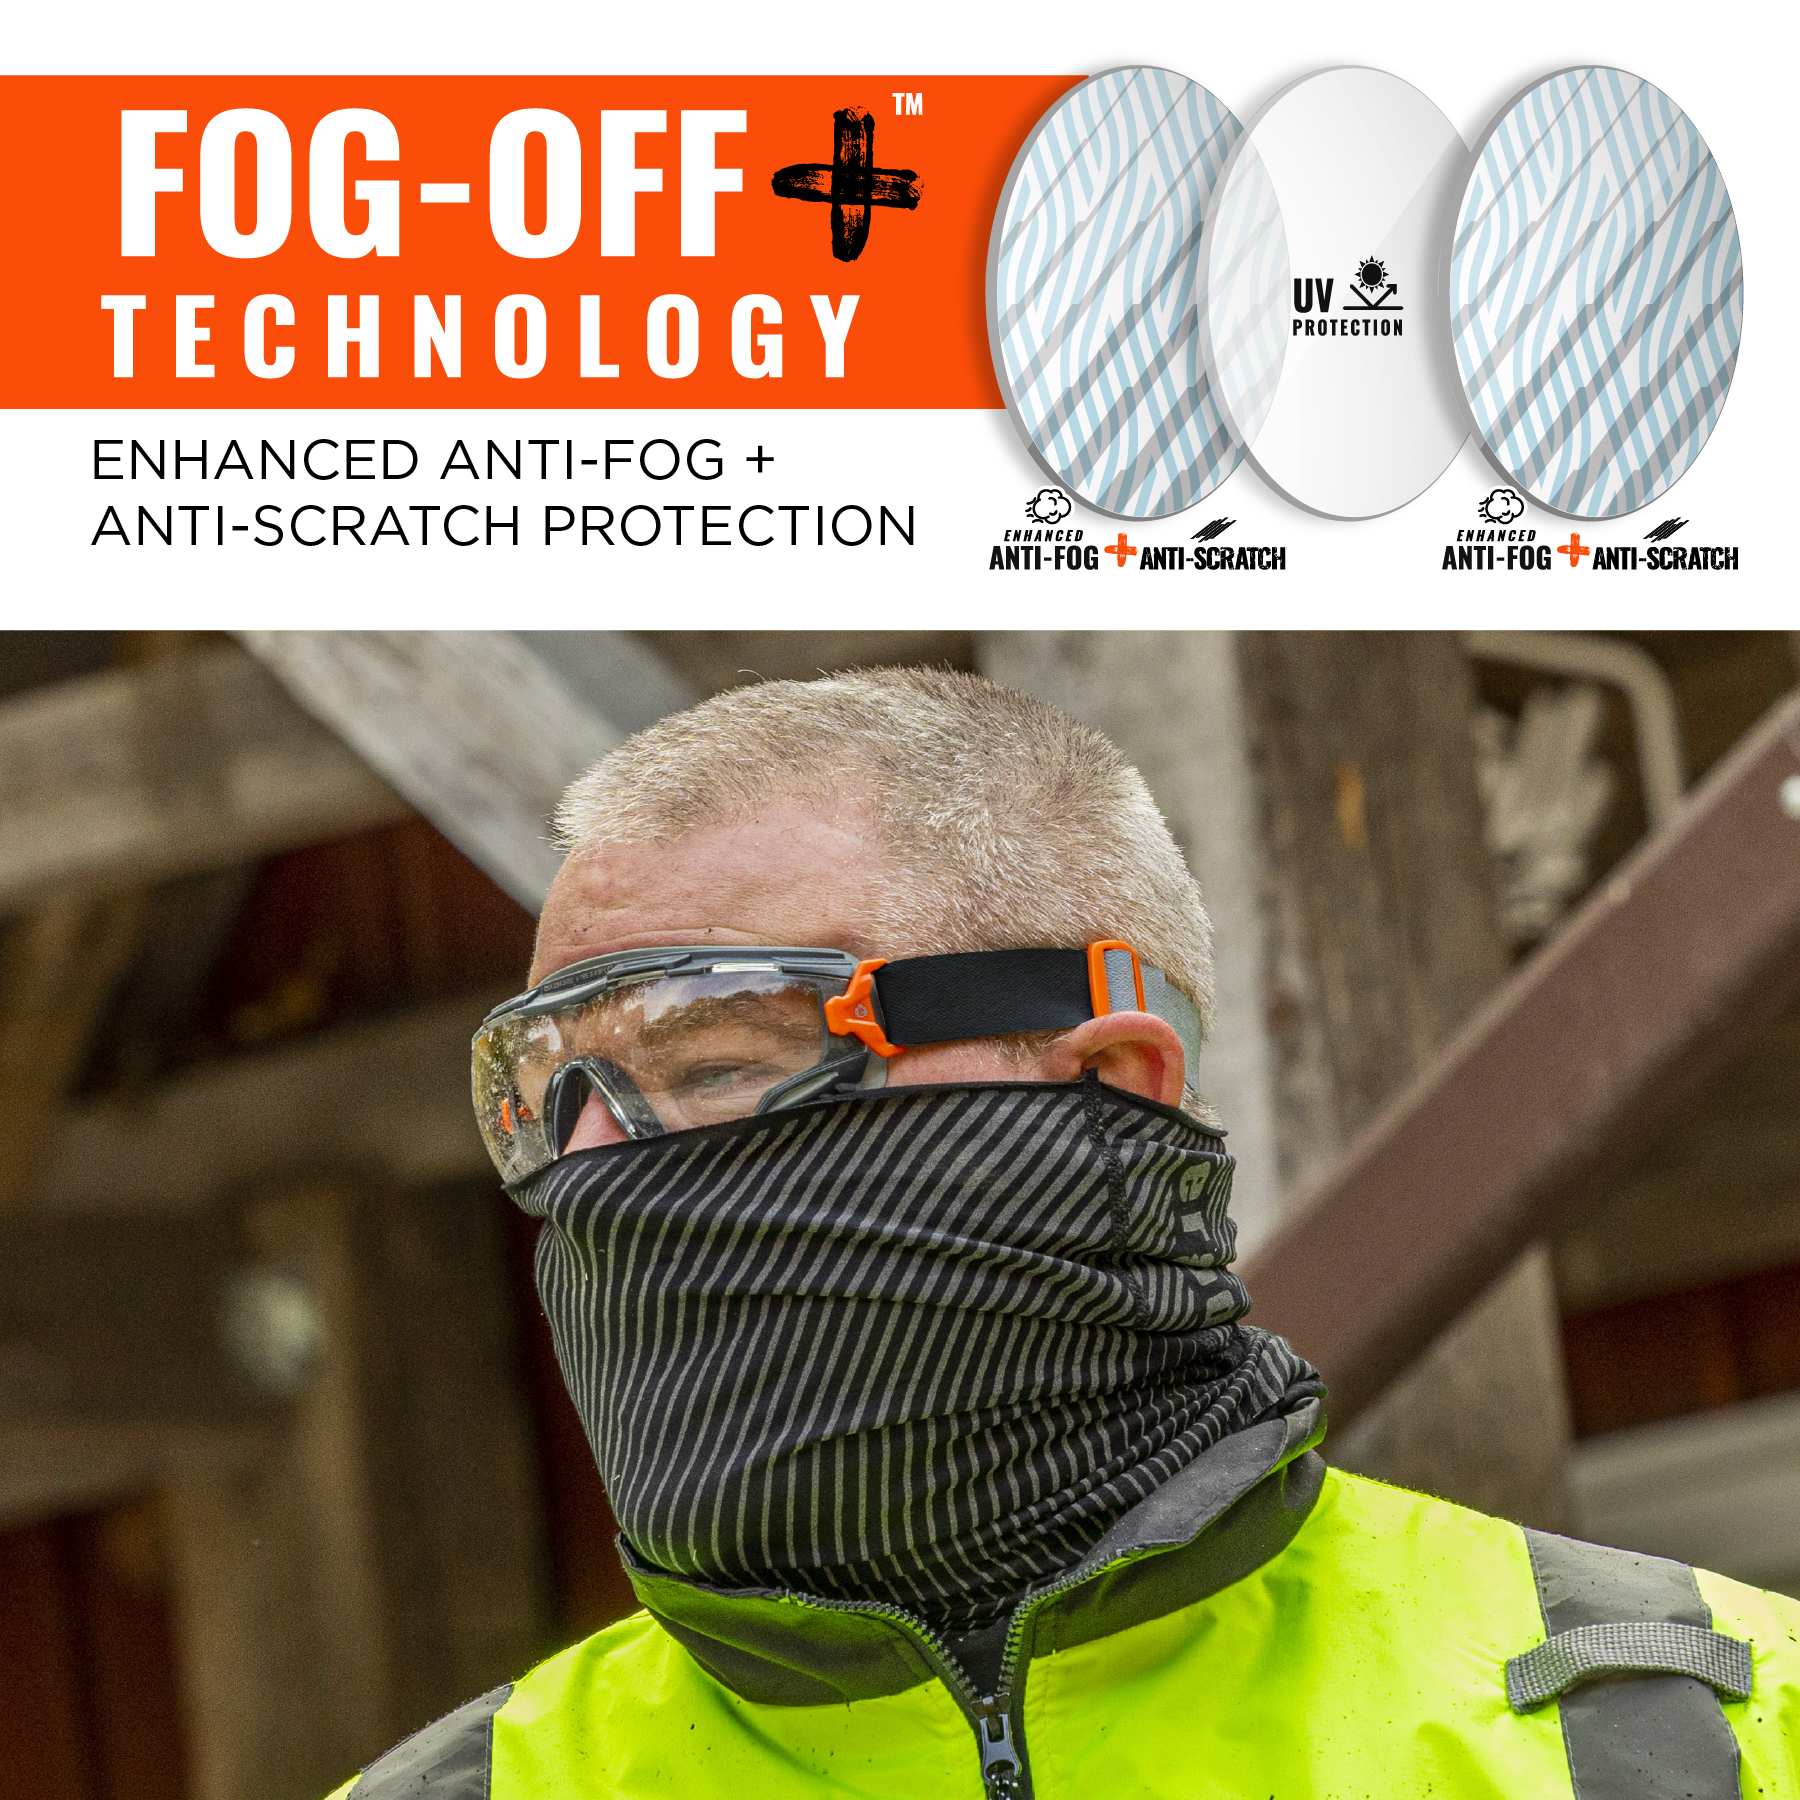 https://www.ergodyne.com/sites/default/files/product-images/60310-arkyn-low-profile-safety-goggles-neoprene-clear-fog-off-plus-technology_0.jpg